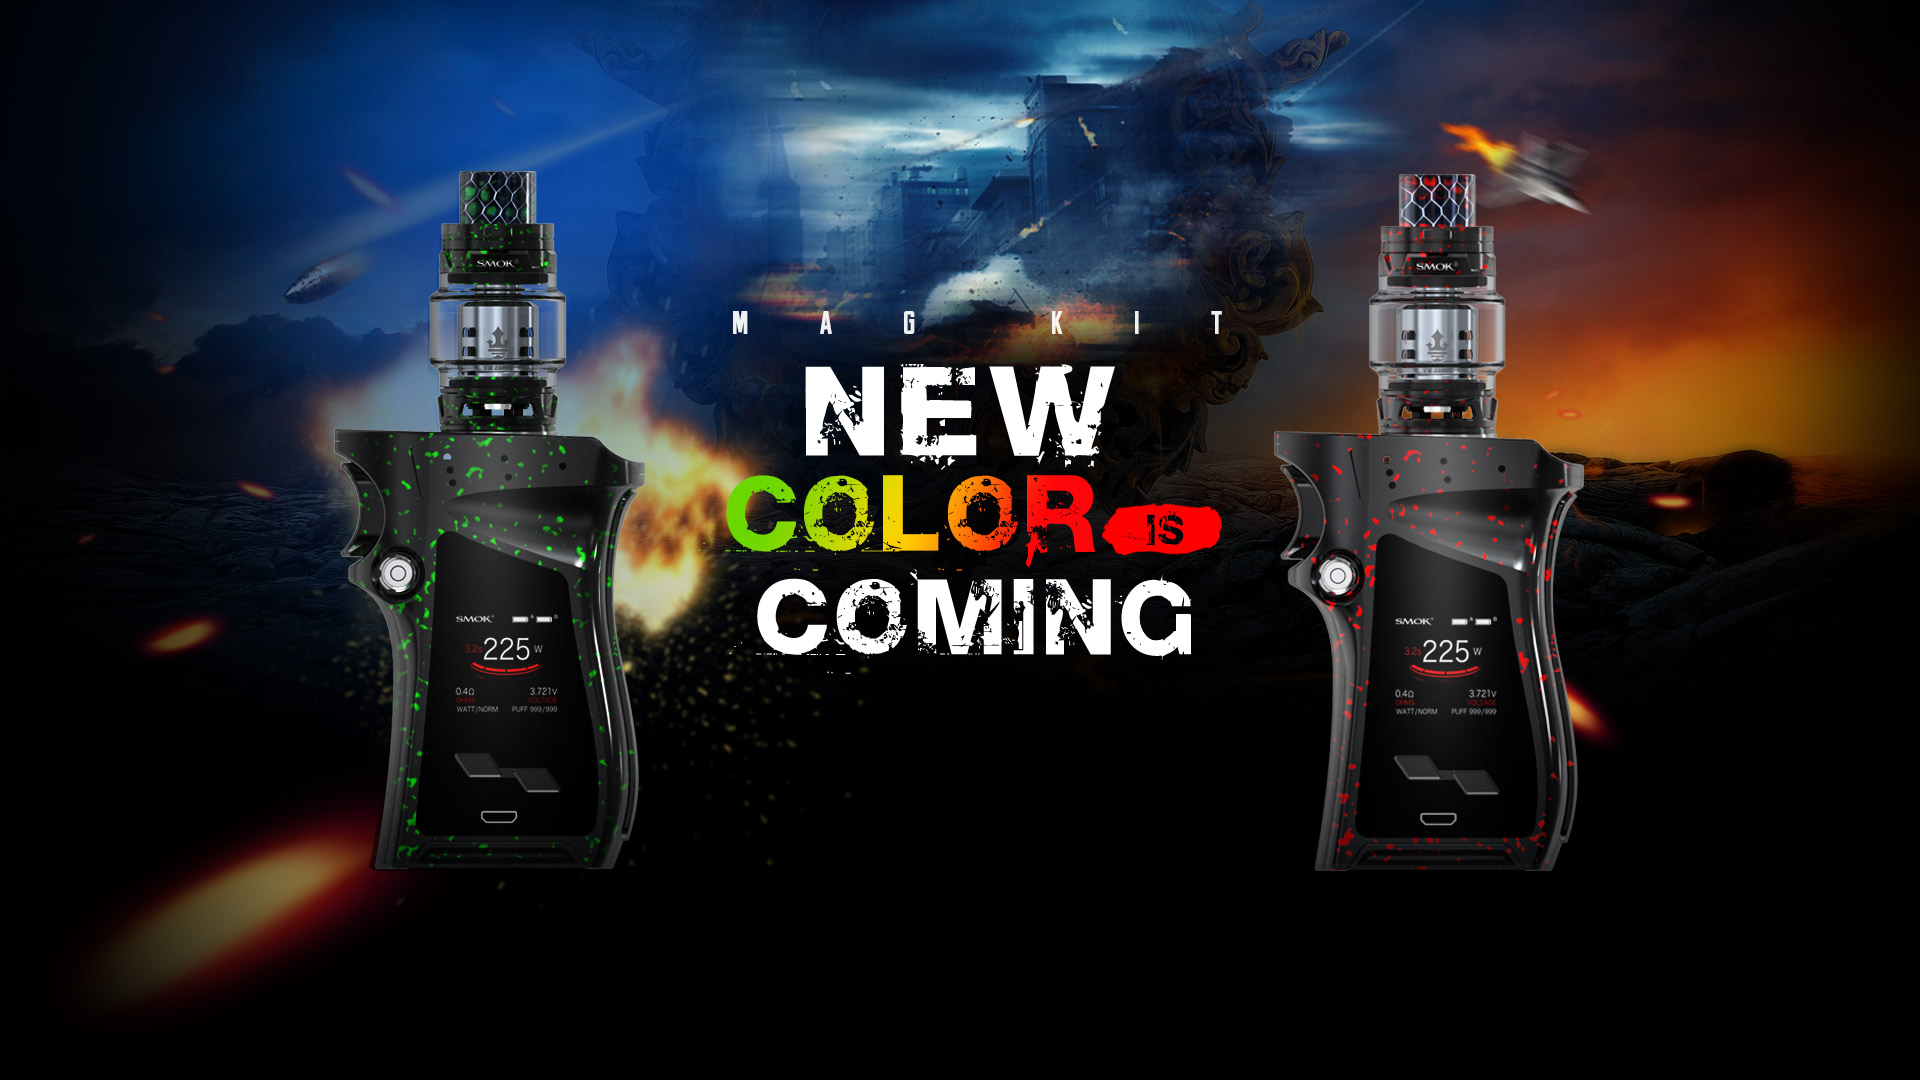 SMOK Mag 225W Kit Has New Color is Coming